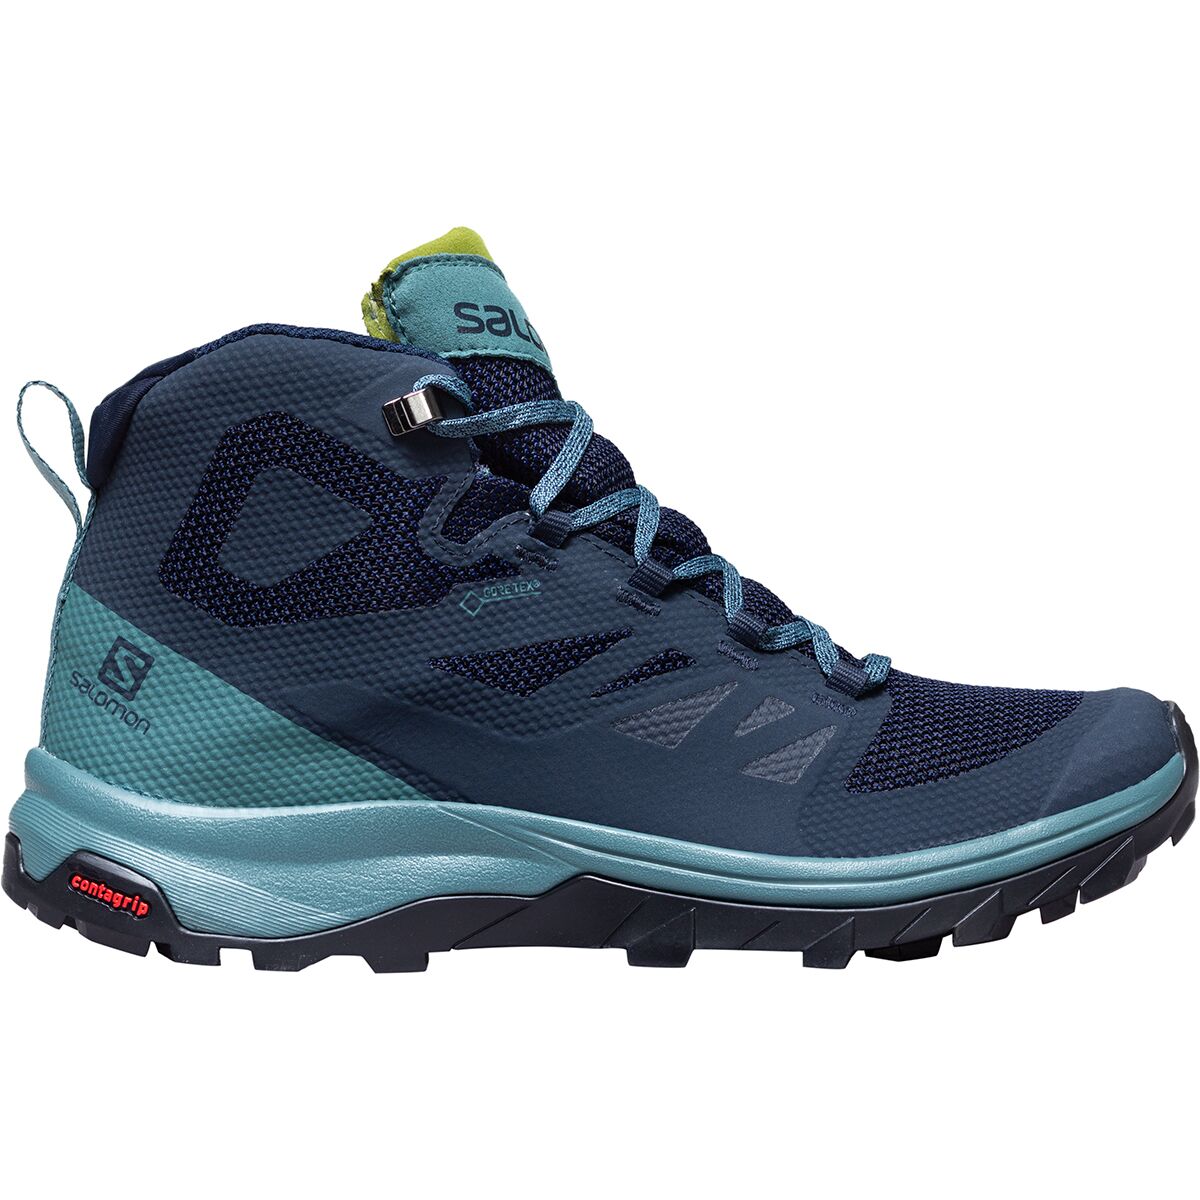 Outline Mid GTX Hiking Boot - Women